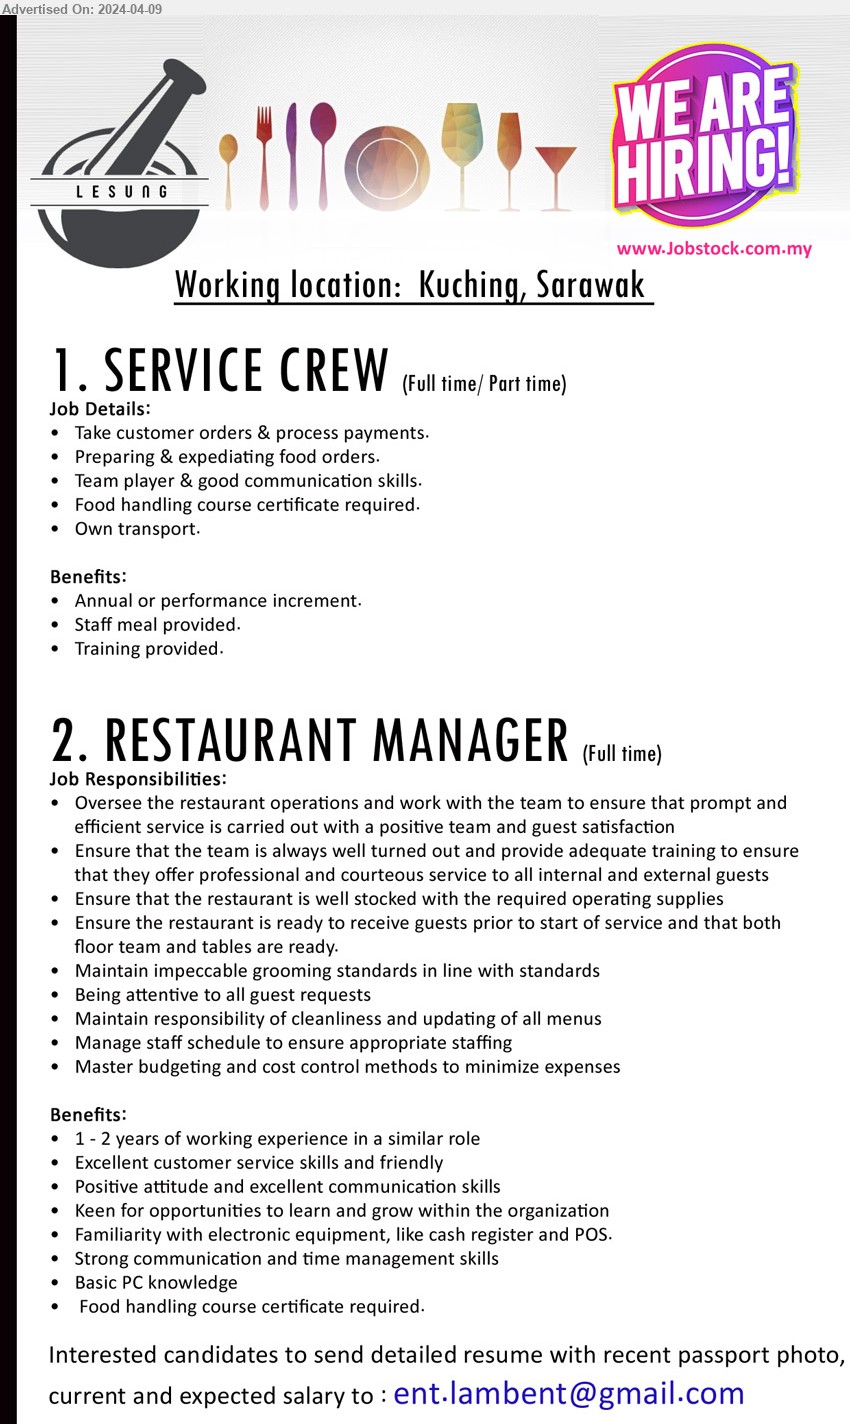 LESUNG - 1. SERVICE CREW (Kuching), Take customer orders & process payments.,...
2. RESTAURANT MANAGER (Kuching), 1-2 yrs. exp., Familiarity with electronic equipment, like cash register and POS.,...
Email resume to ...
